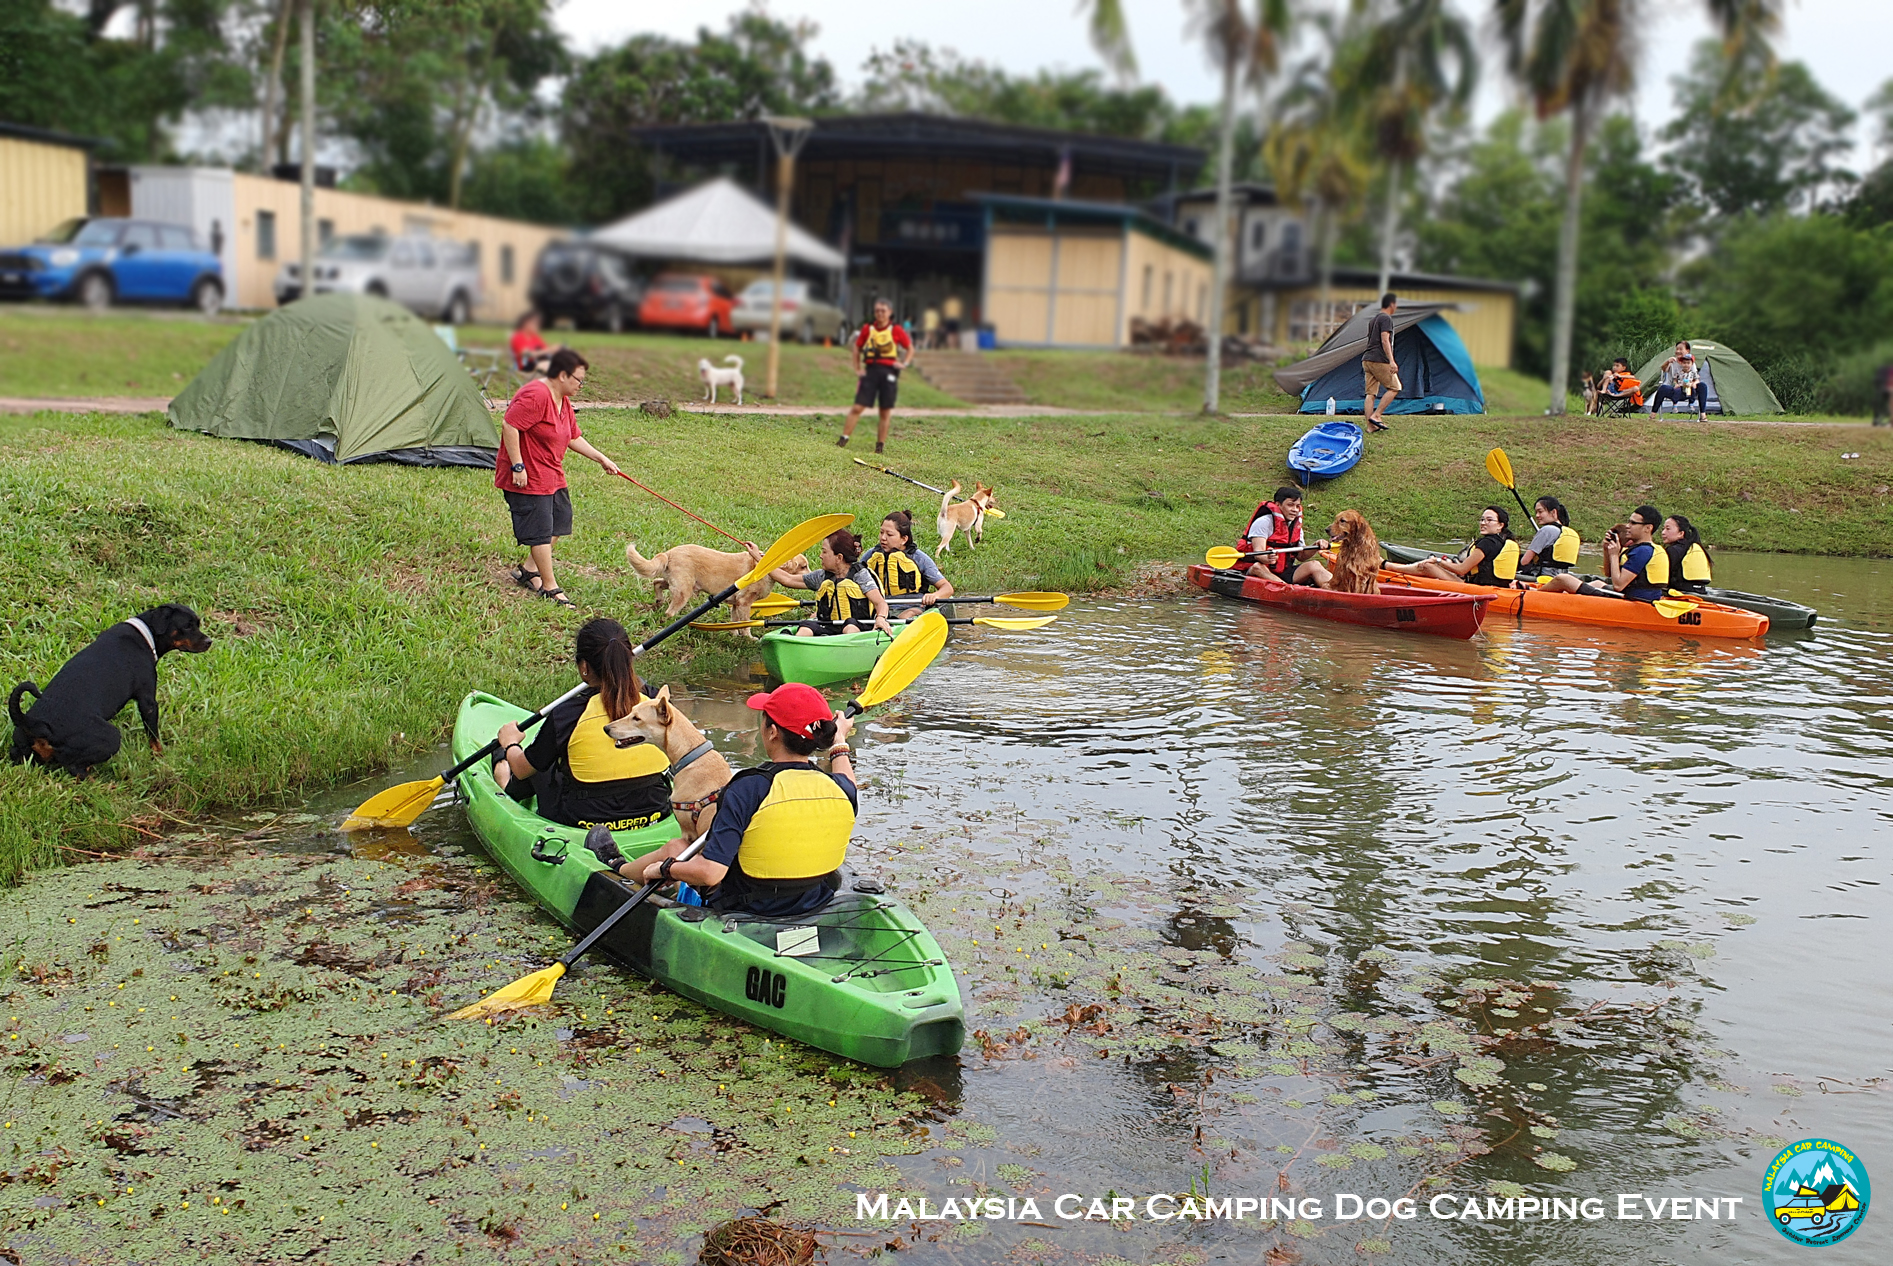 kayaking_dog_dog_camping_event_selangor_camping_site_malaysia_car_camping_private_event_organizer-10